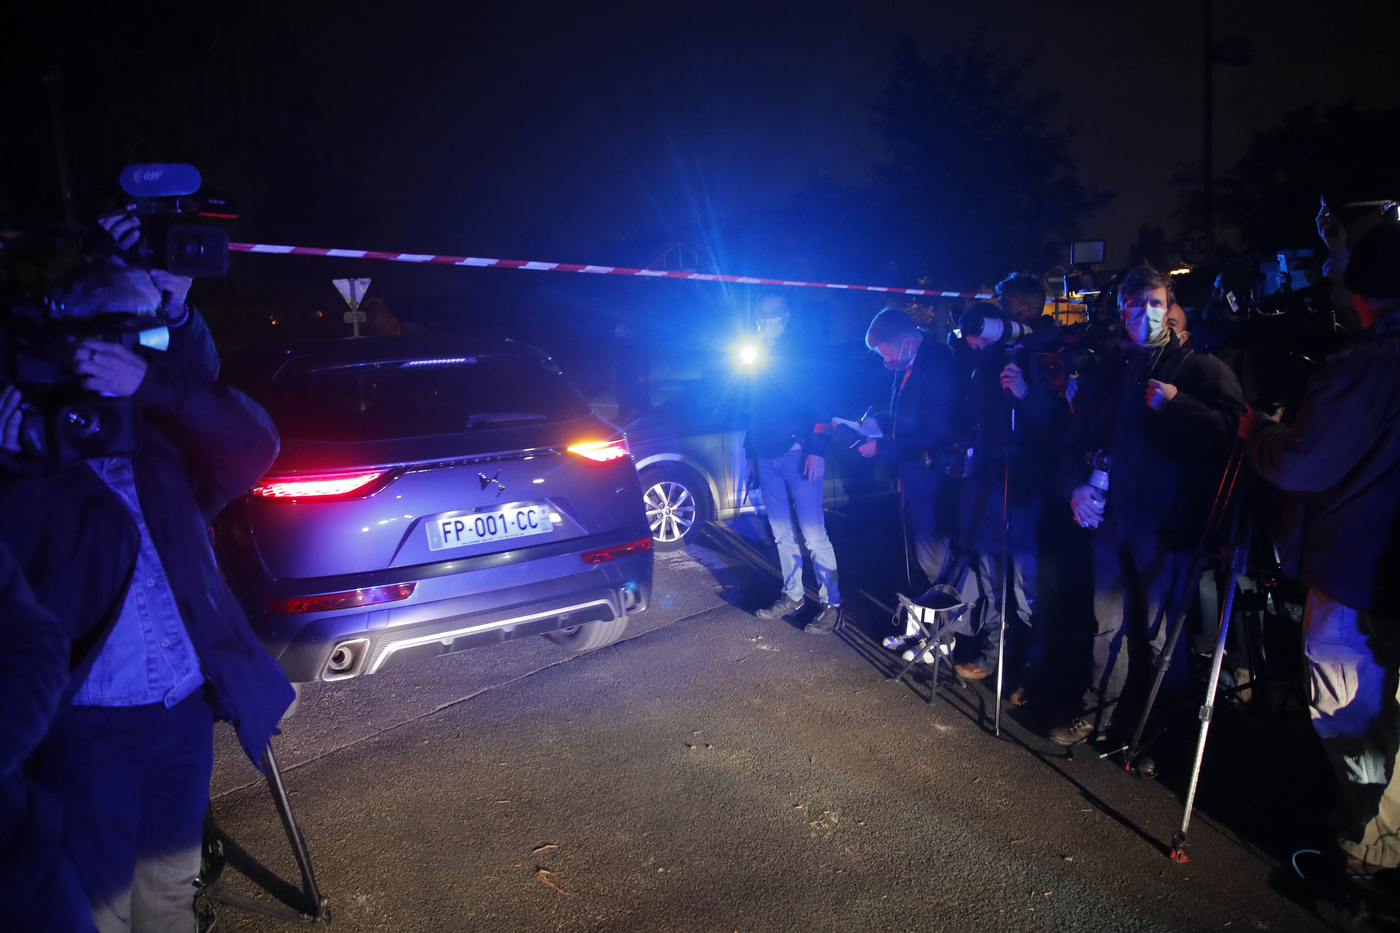 A police car enters the perimeter after a history teacher who opened a discussion with students on caricatures of Islam's Prophet Muhammad was decapitated, Friday, Oct. 16, 2020 in Conflans-Saint-Honorine, north of Paris. Police have shot the suspected killer dead. (AP Photo/Michel Euler)